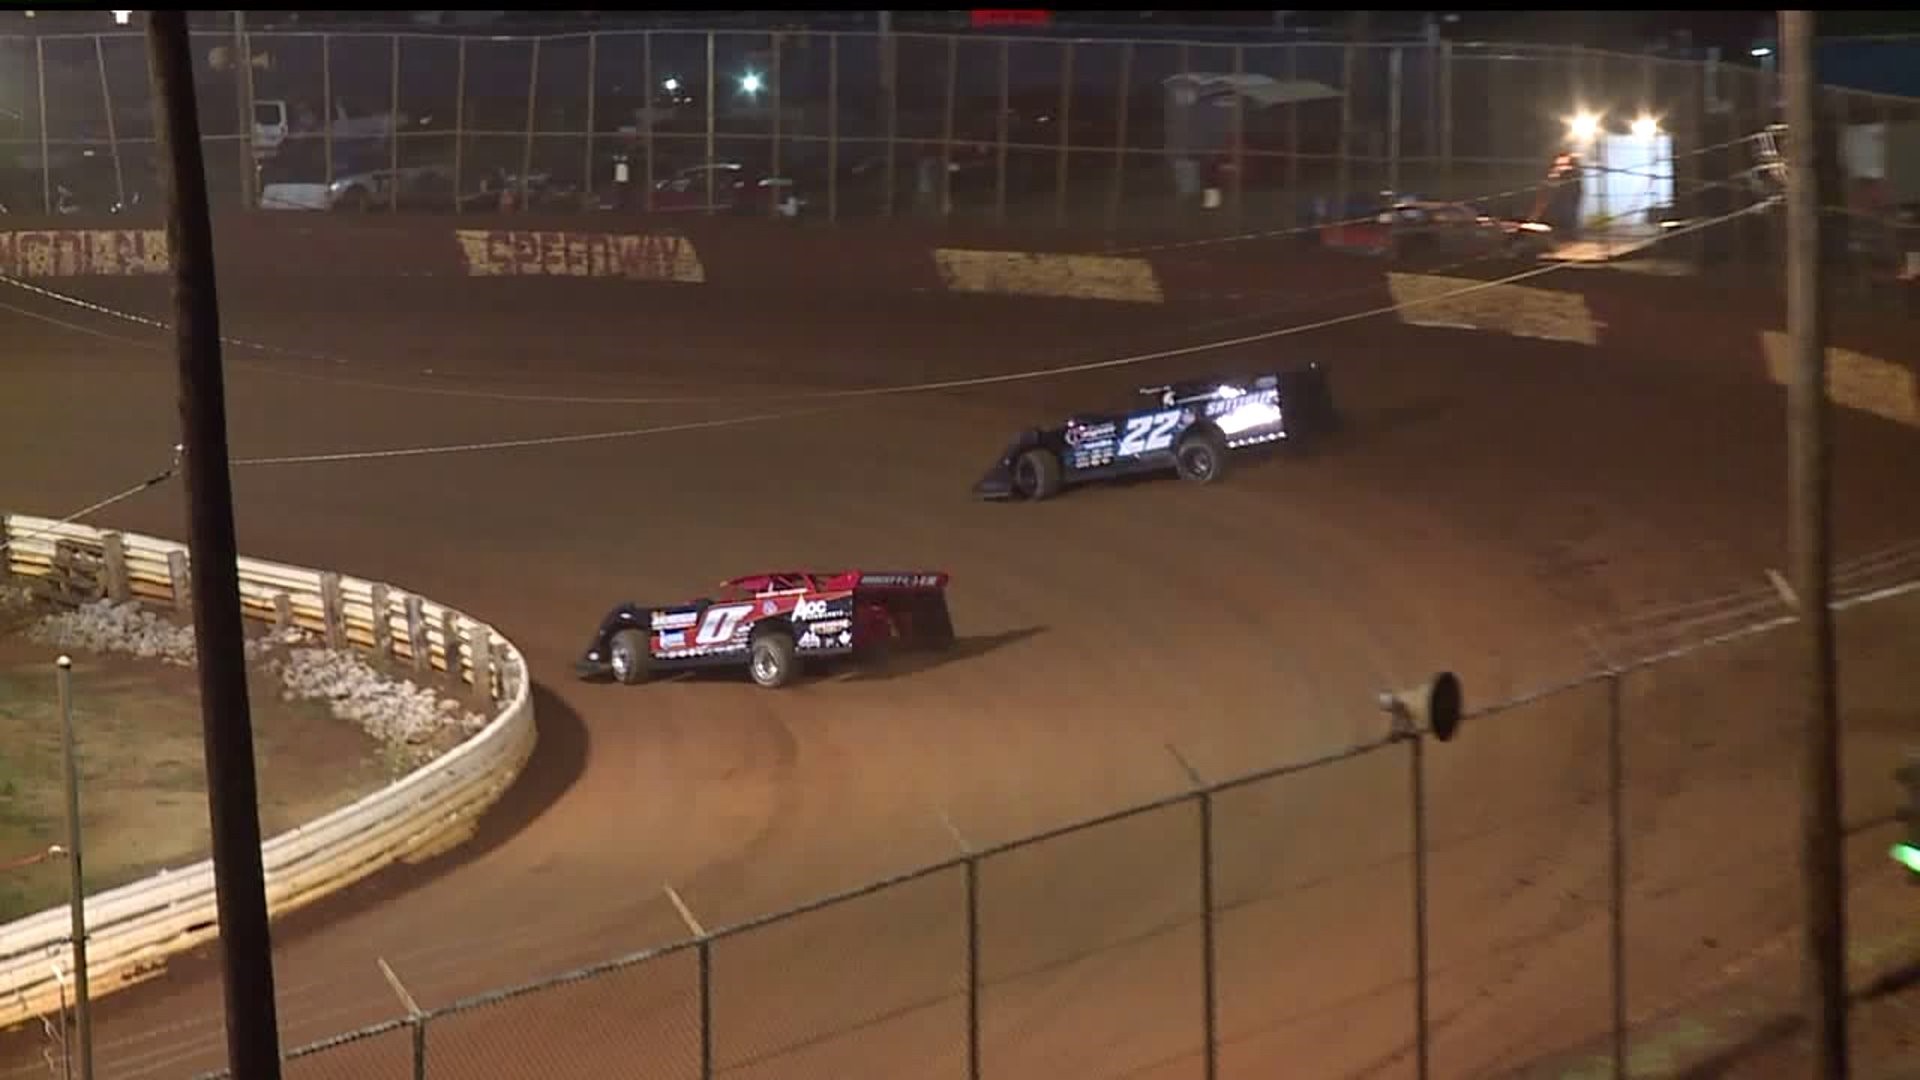 Frenzy Fast Lane stops Lincoln Speedway